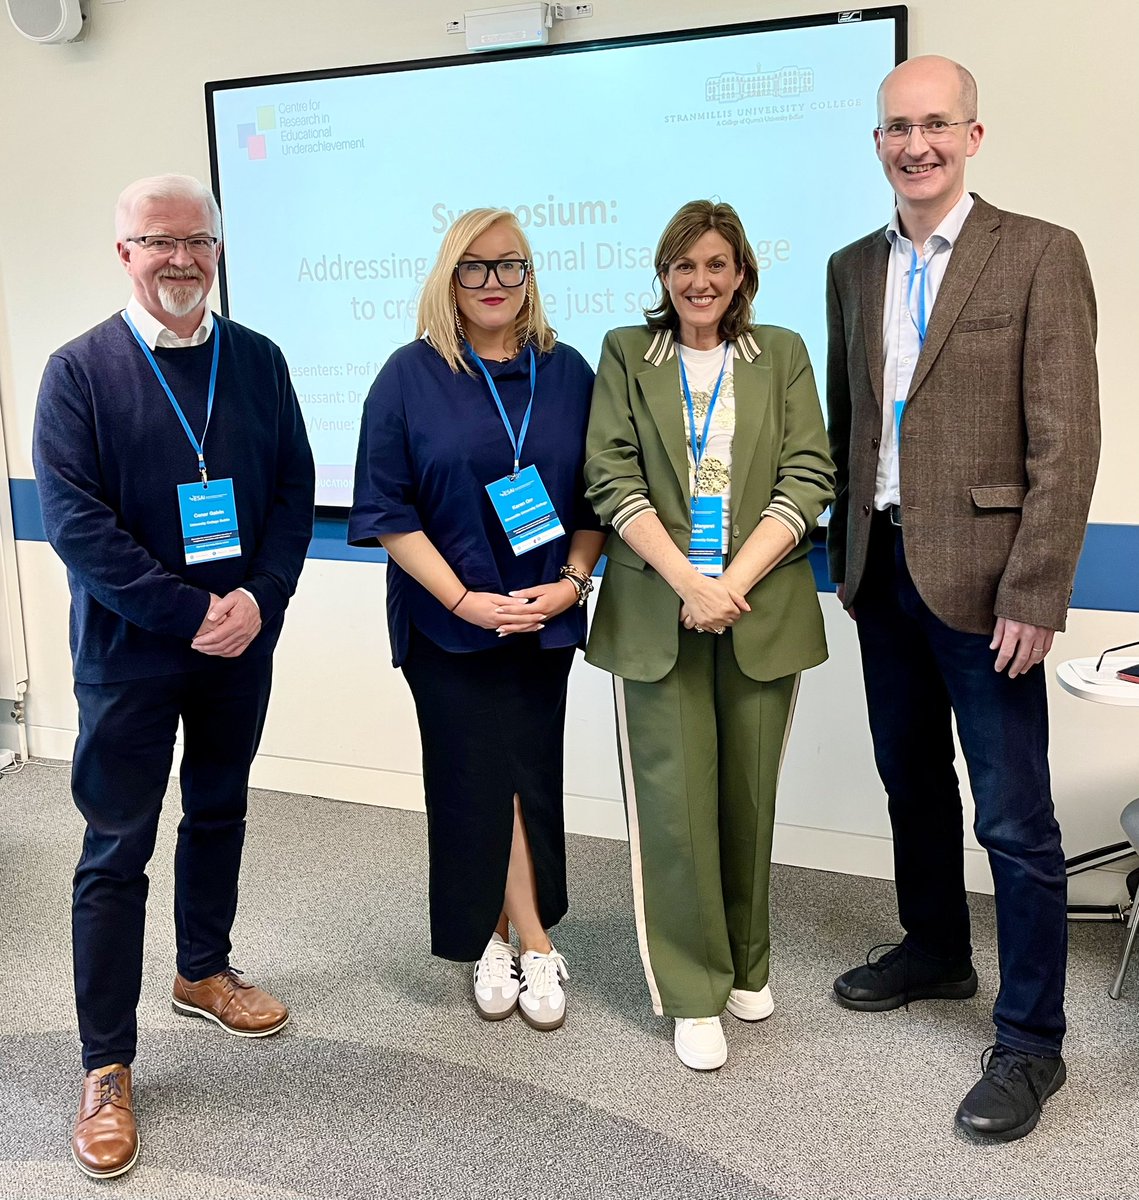 @StranCreu (Noel Purdy, Glenda Walsh and Karen Orr) led a symposium today at the @esai_irl conference in @MaynoothUni focusing on our recent research addressing educational disadvantage in Ireland north and south. Special thanks to @_conorgalvin for acting as discussant. #esai24